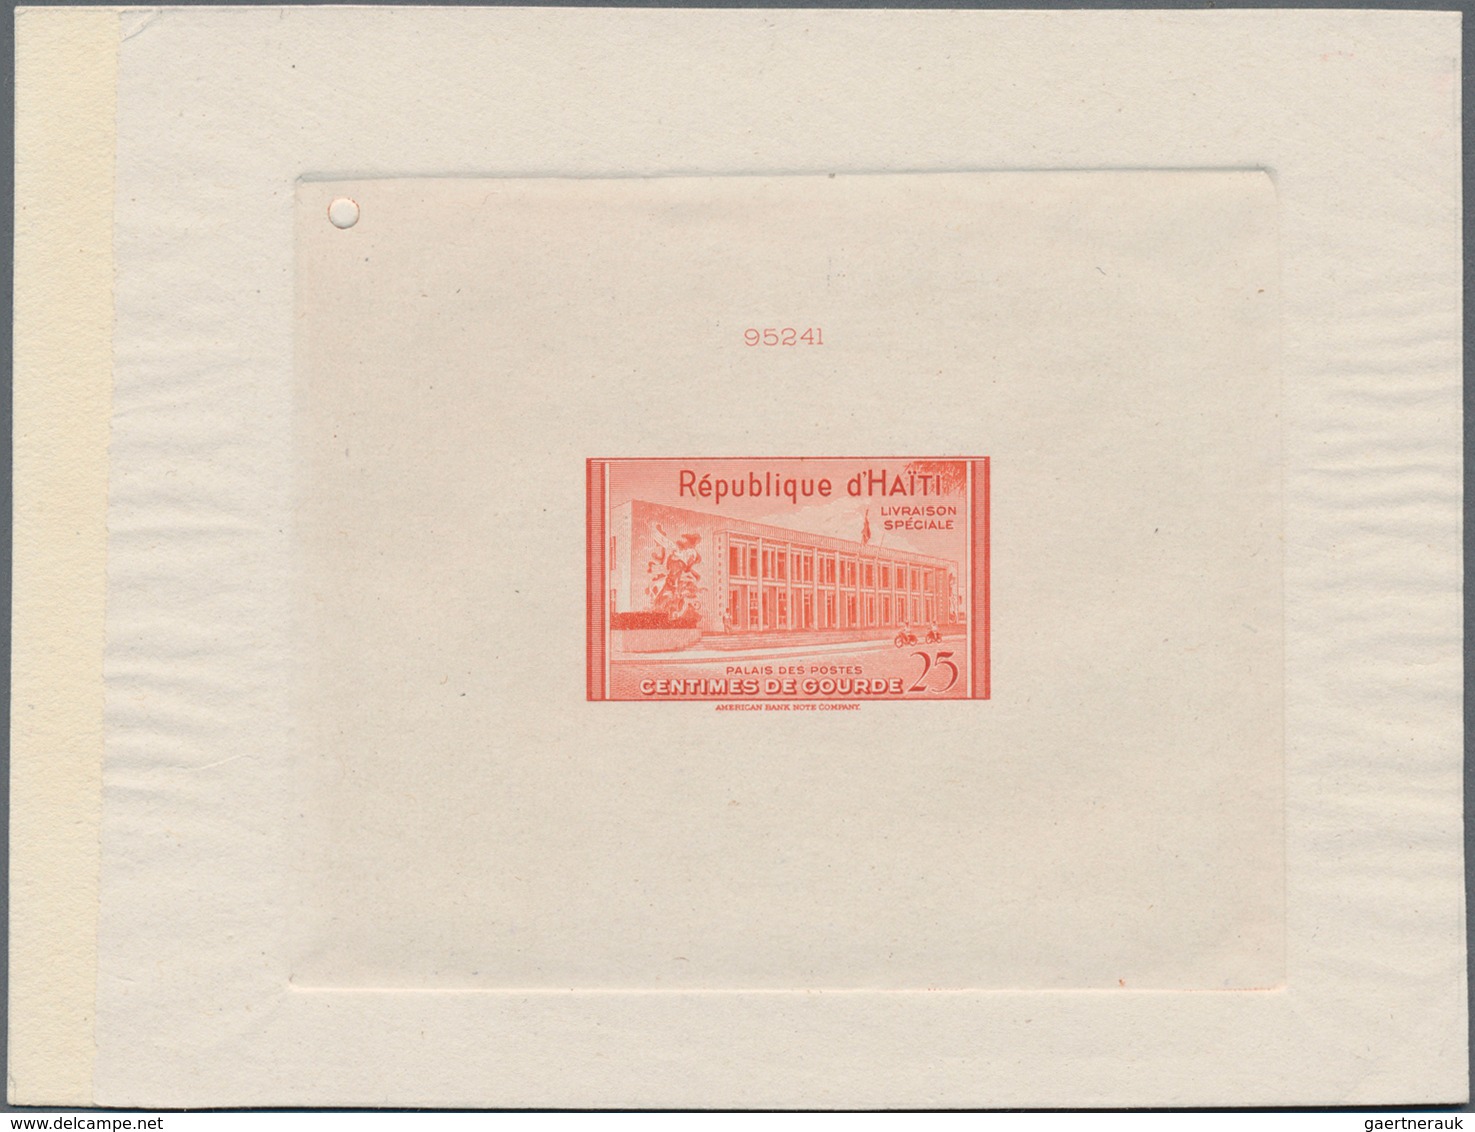 Haiti: 1953. Lot Of 3 Different Epreuves For The 25c Express Stamp Showing Main Post Office. - Haïti